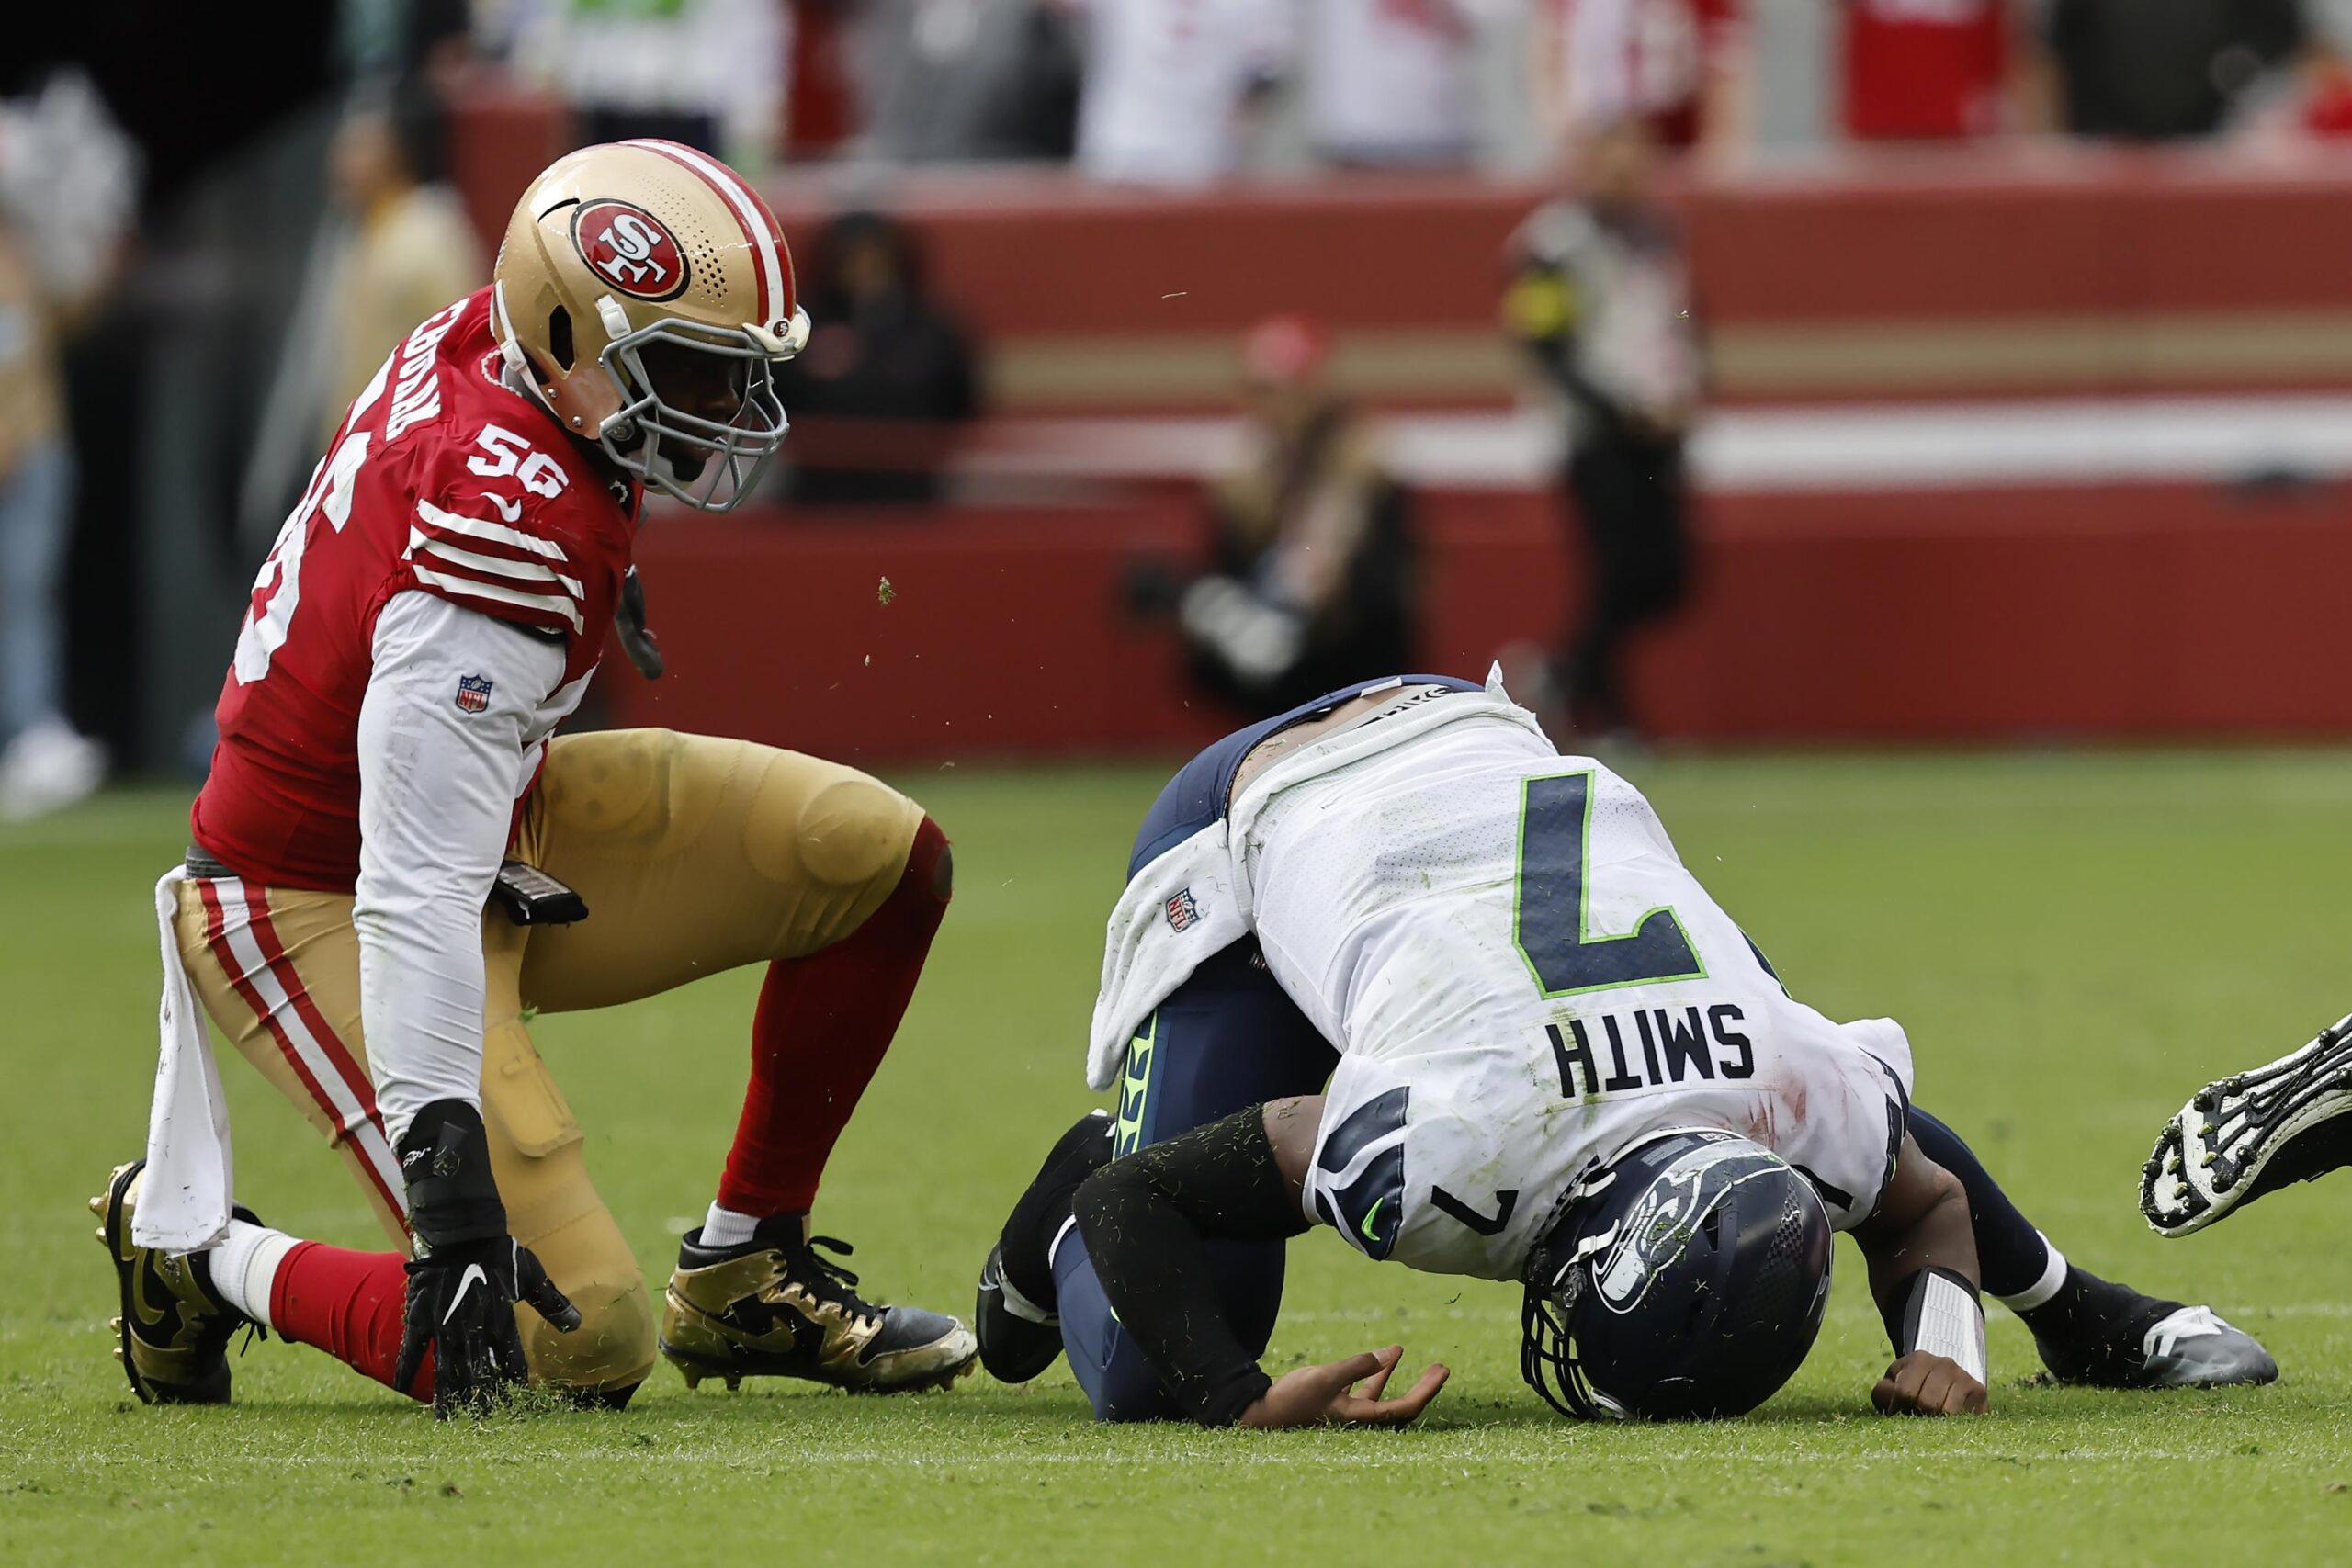  The 49ers Claim the NFC West with Win Over the Seahawks